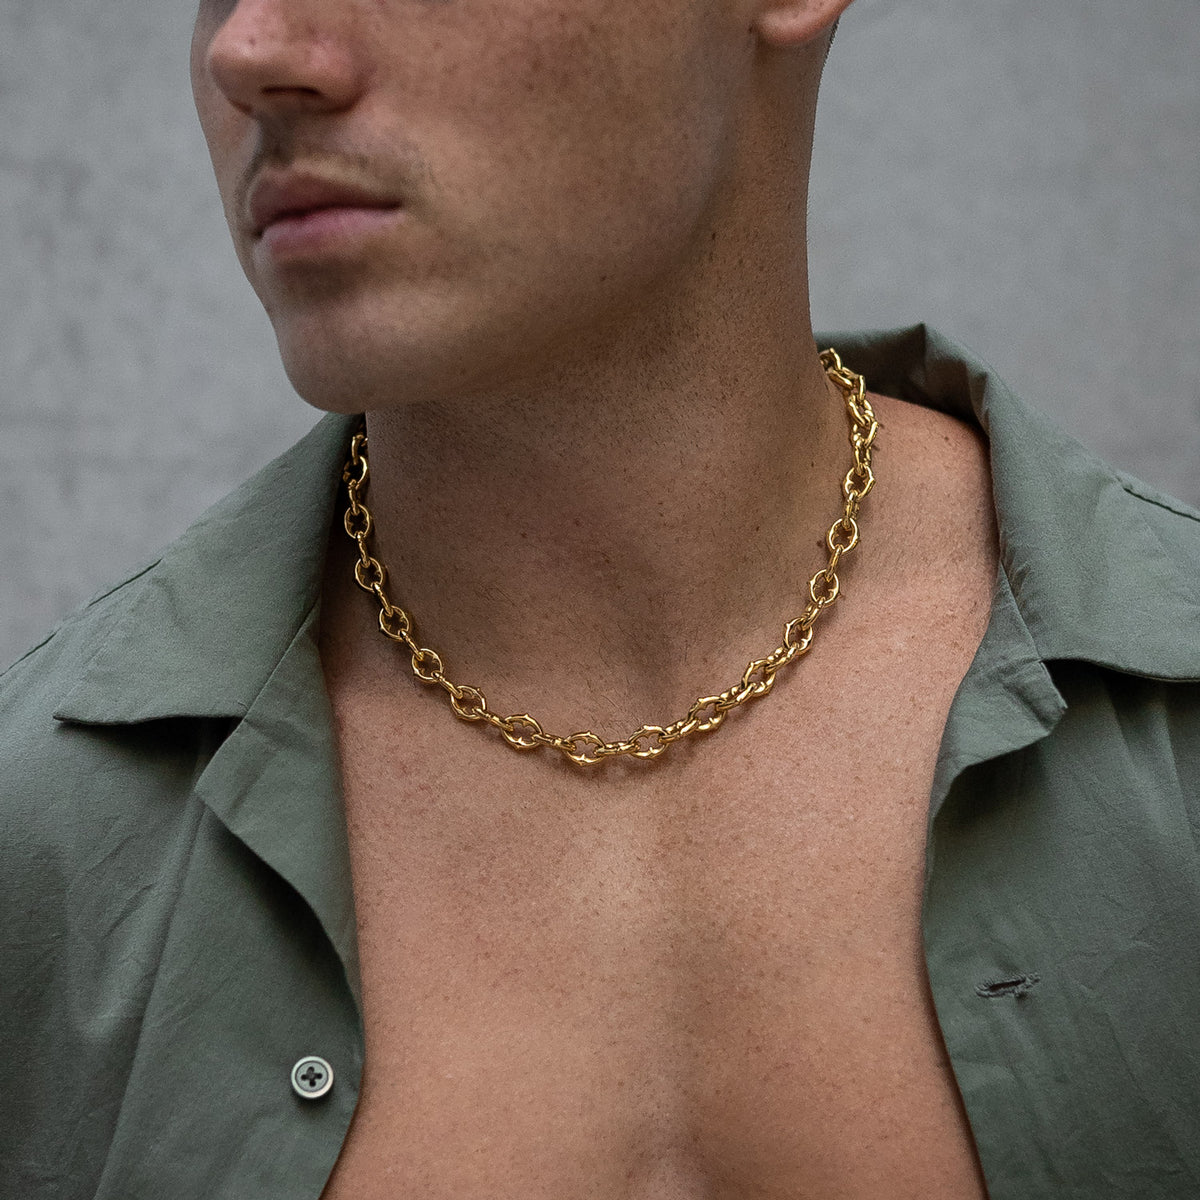 Mens gold spiked necklace chain 